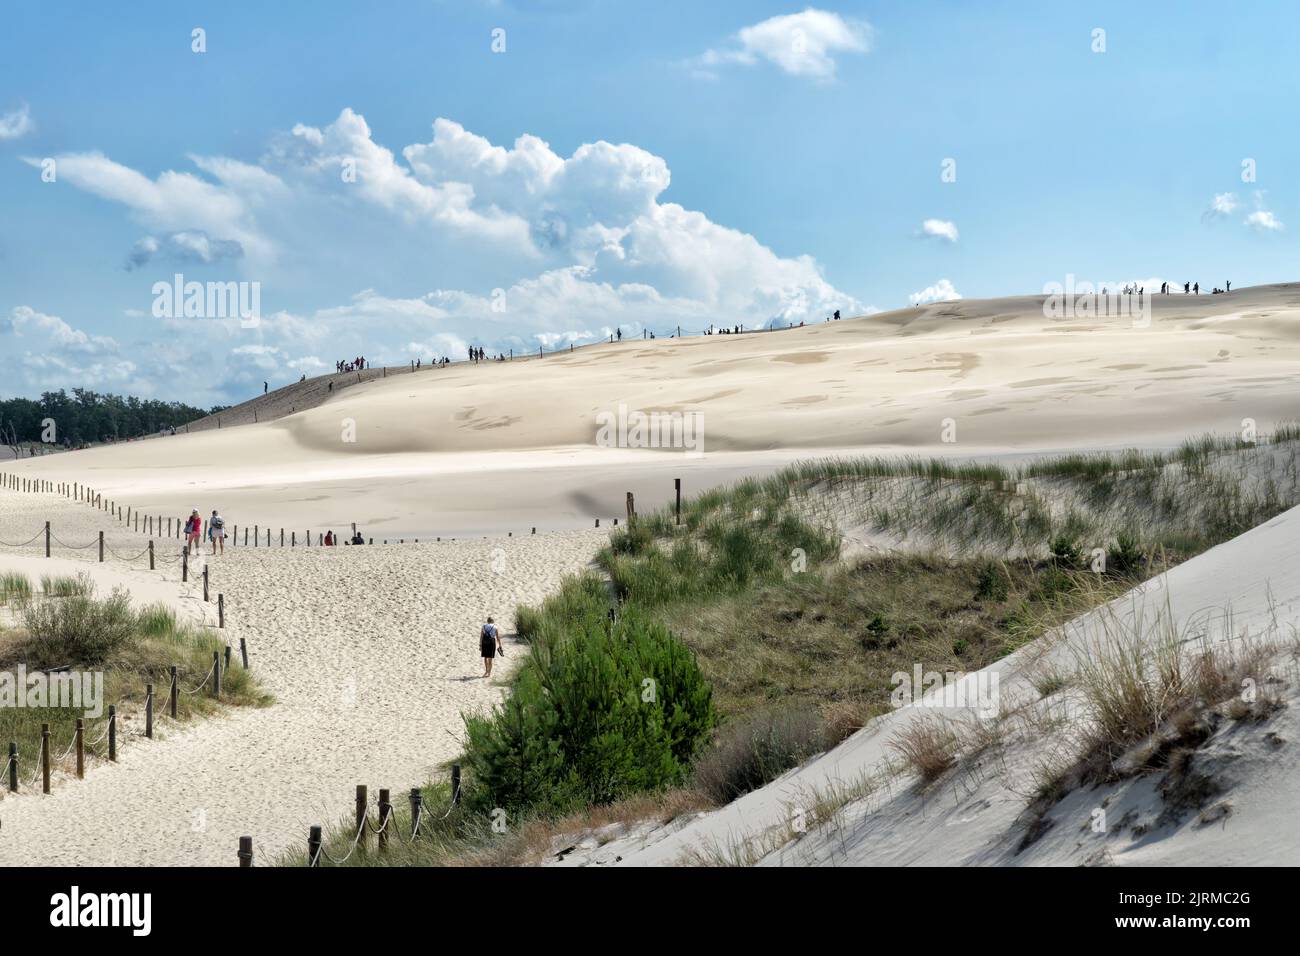 People explore in Lacka dune in Slowinski National Park in Poland. Traveling dune in sunny summer day. Sandy beach and blue sky with white clouds. Stock Photo